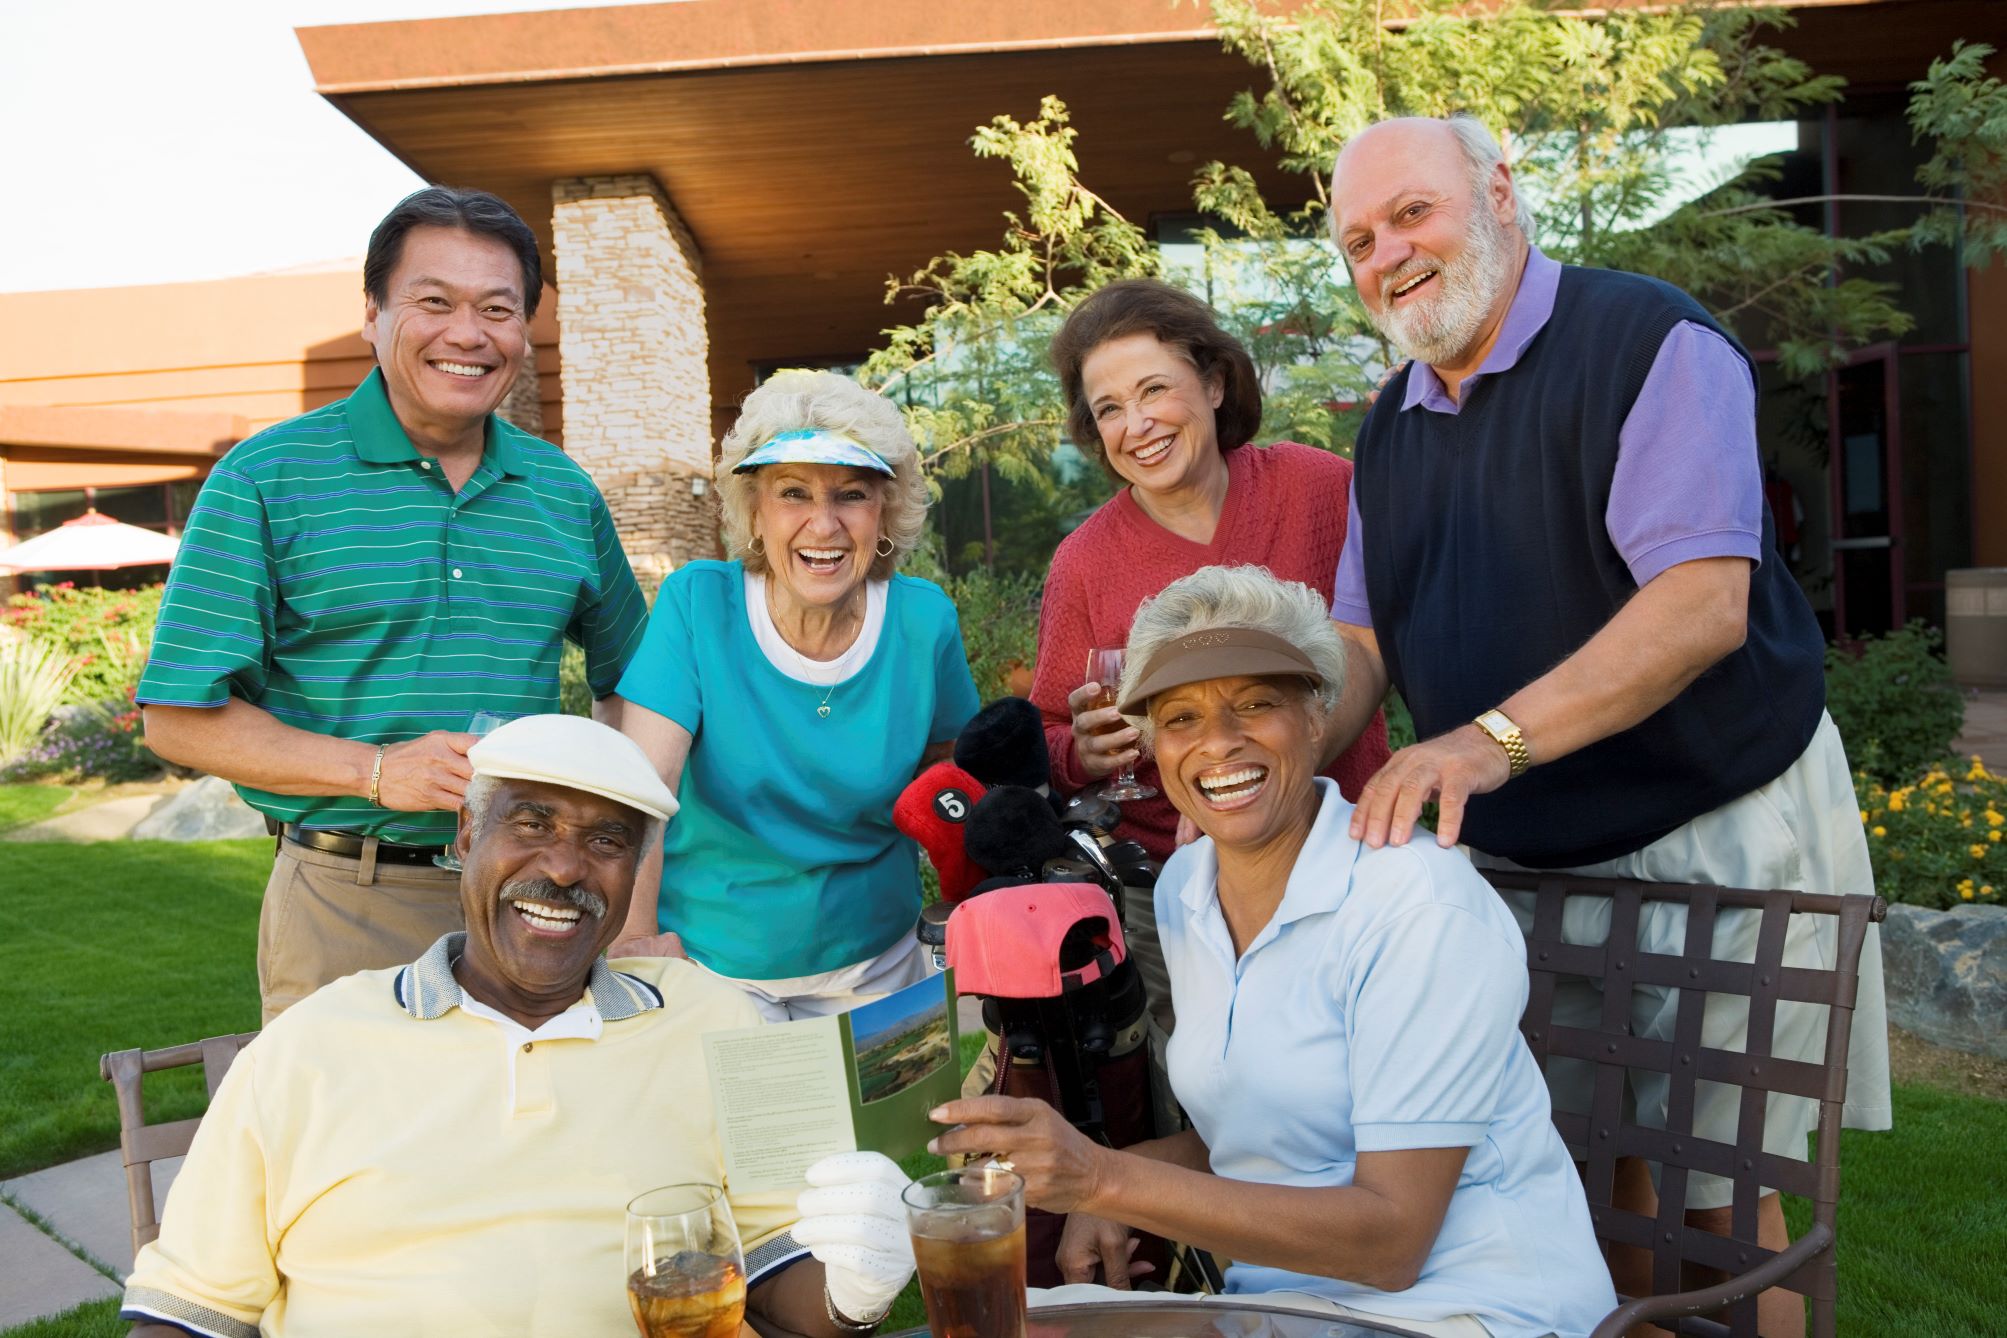 A group of golfers enjoying each other's company.